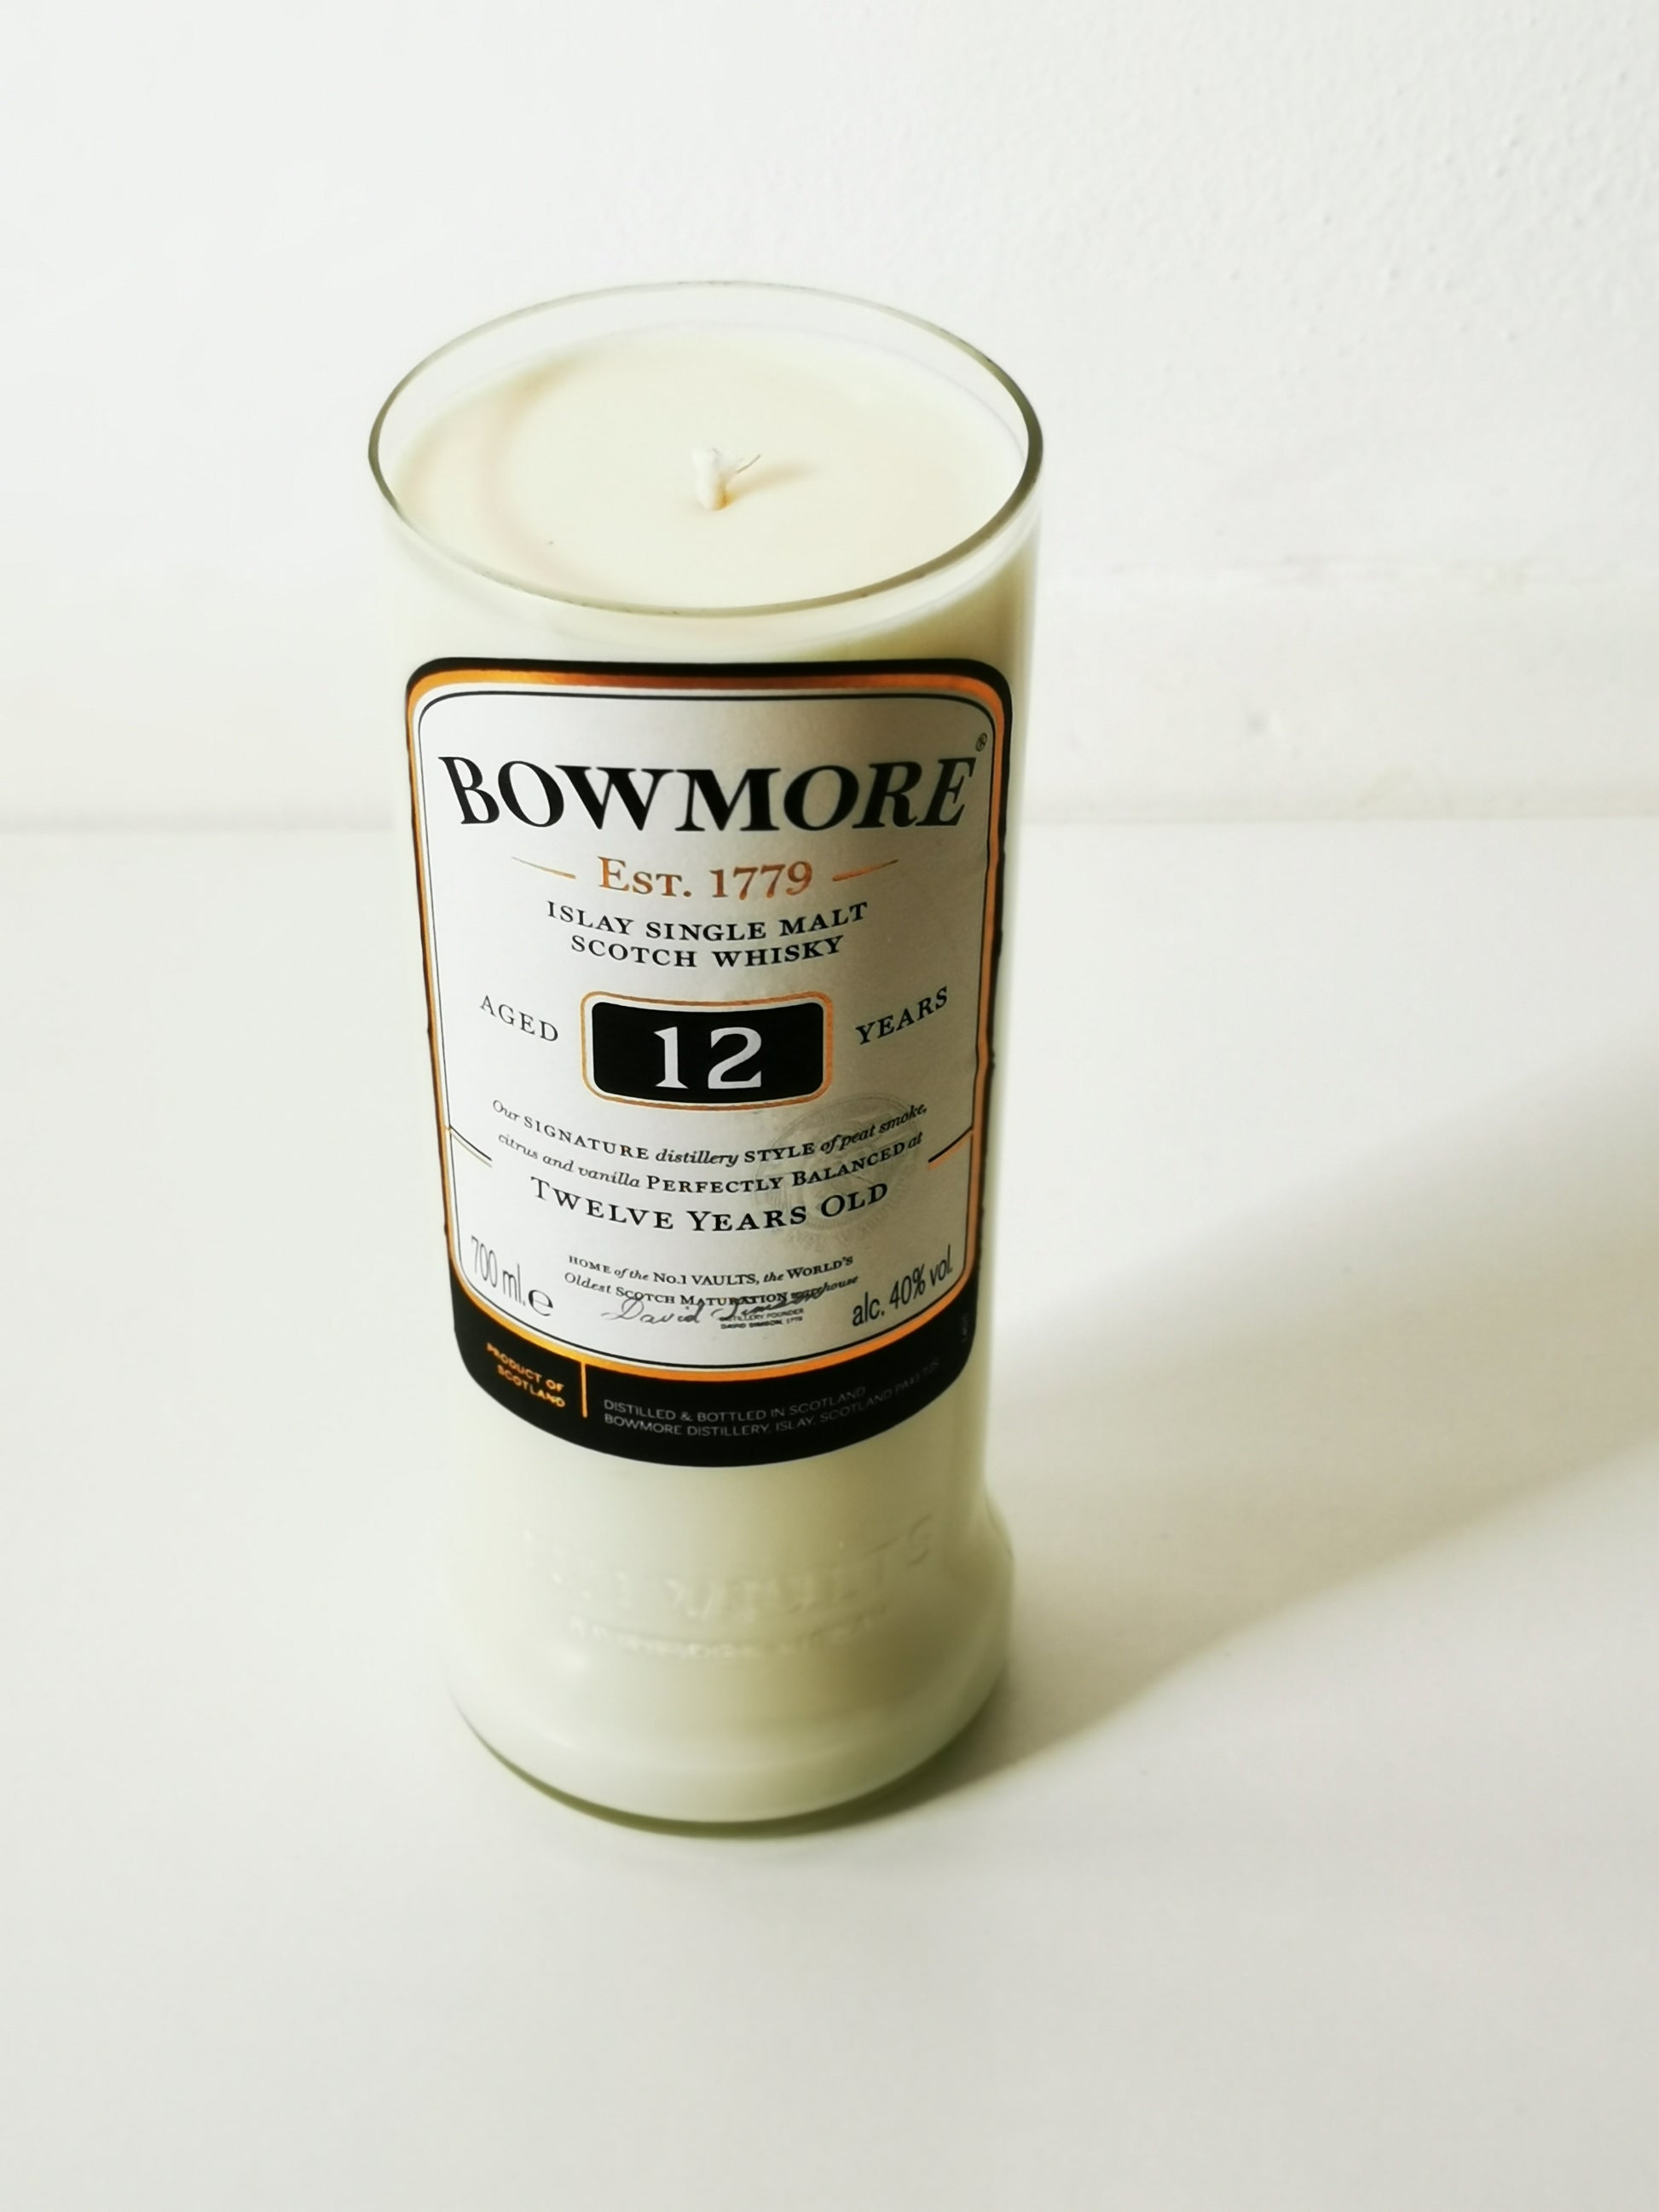 Bowmore 12 Year Old Whisky Bottle Candle Whiskey Bottle Candles Adhock Homeware